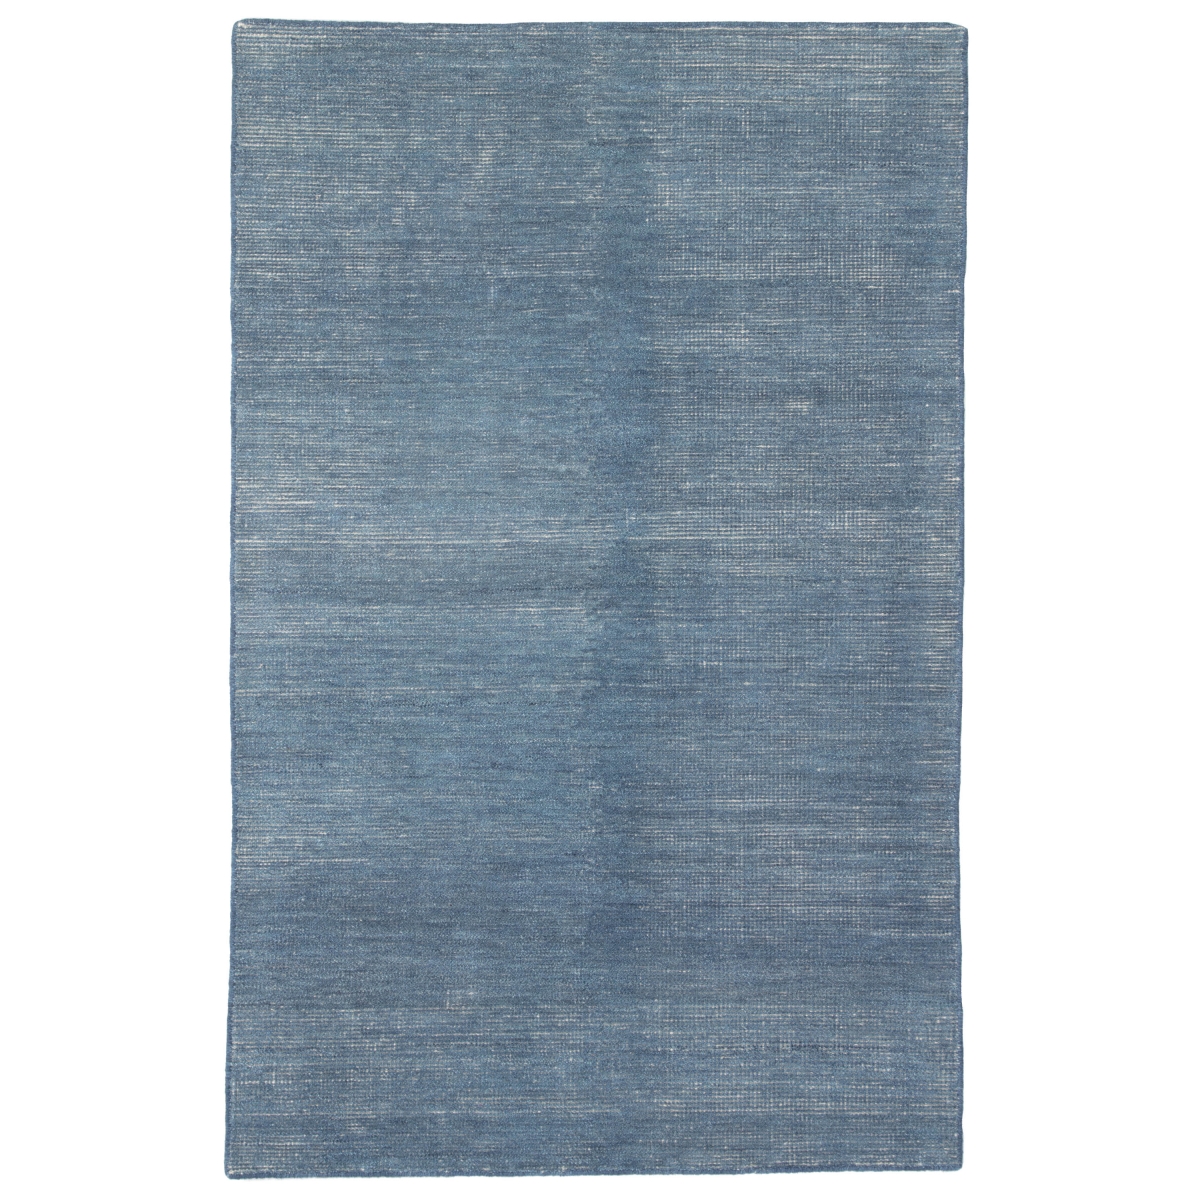 Rug128181 9 X 12 Ft. Paramount Hand-knotted Solid Indigo & White Area Rug